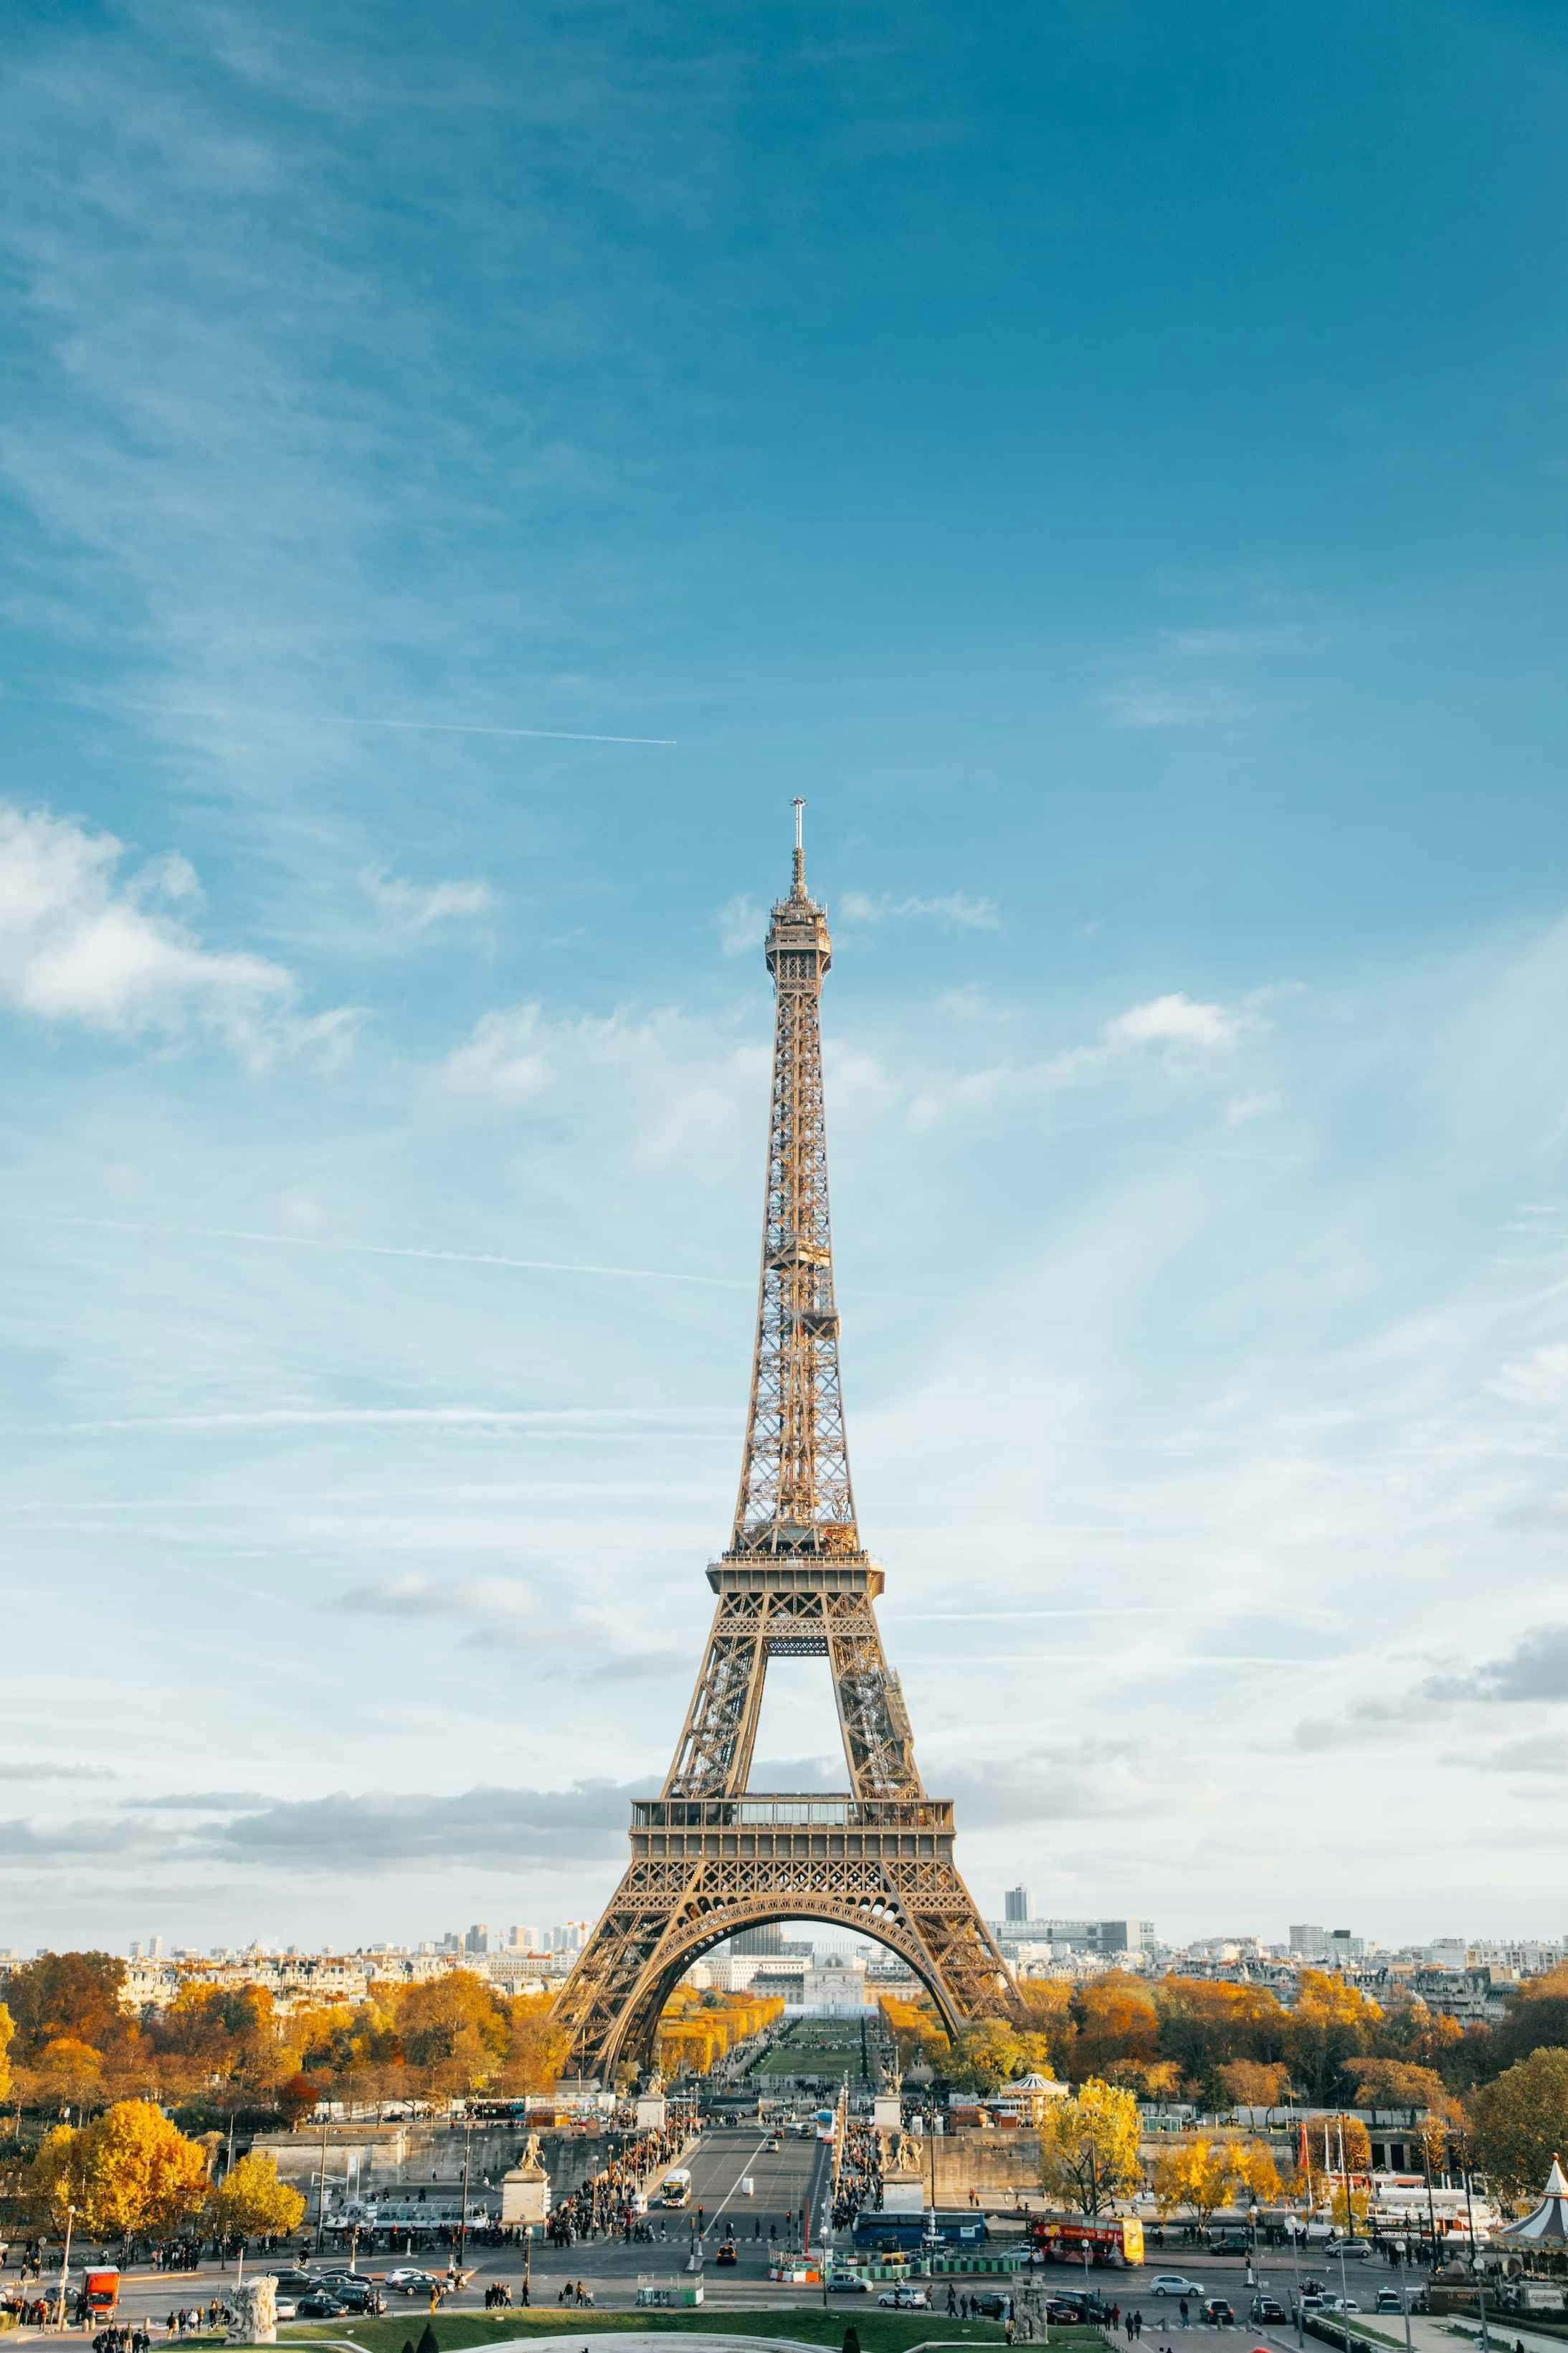 Picture of the Eiffel tower in Paris